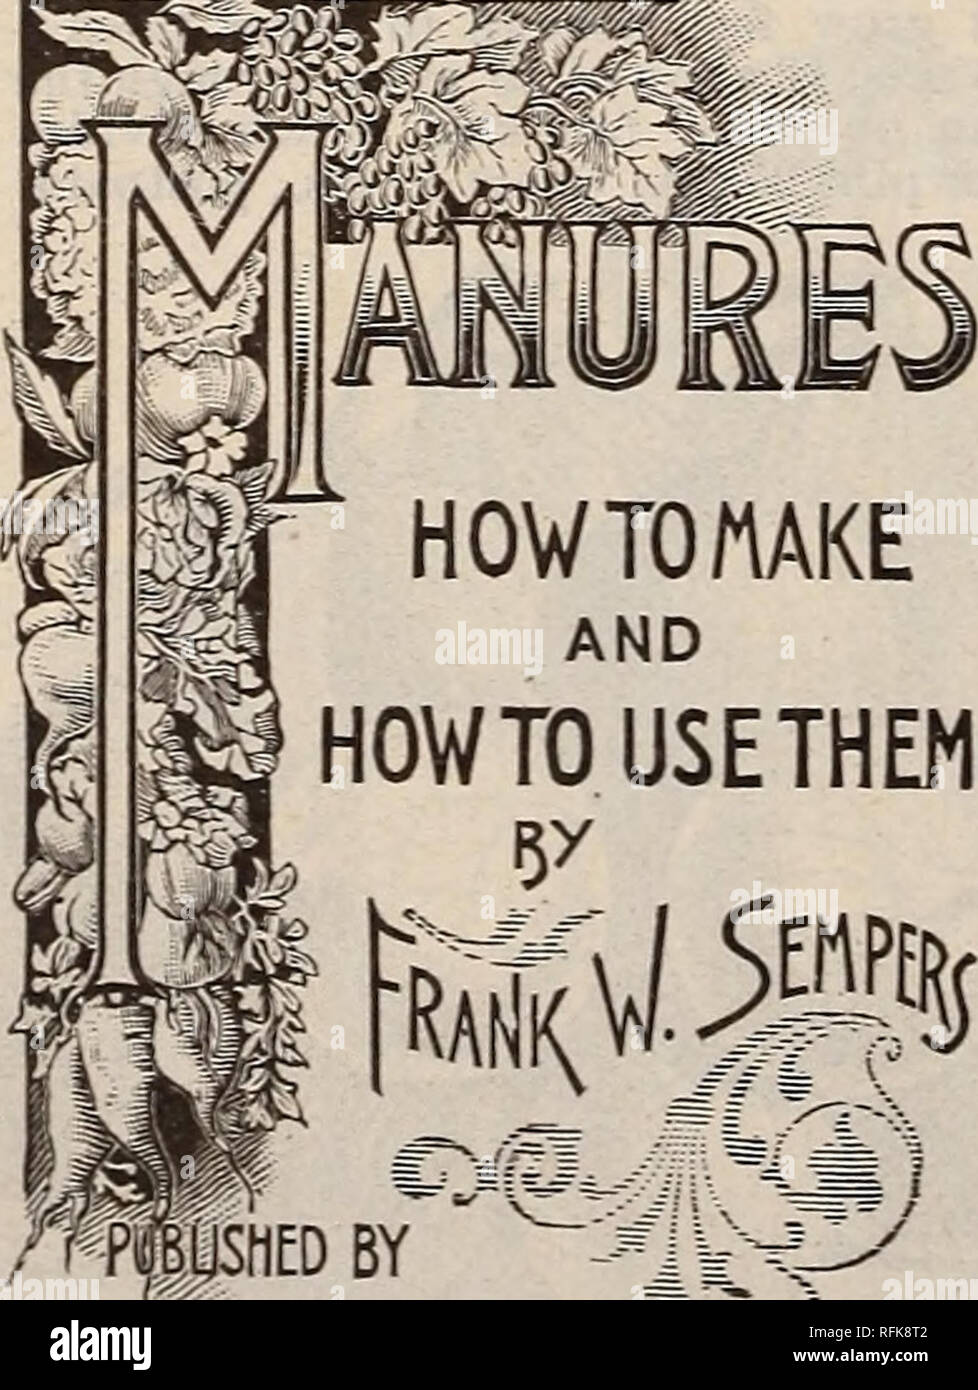 . Burpee's farm annual written at Fordhook Farm. Nurseries (Horticulture) Pennsylvania Philadelphia Catalogs; Vegetables Seeds Catalogs; Plants, Ornamental Catalogs; Flowers Seeds Catalogs. IMPROVED GUERNSEY PARSNIP. MANURES: HOW TO MAKE AND HOW TO USE THEM A Practical Treatise on the Chemistry of Manures and Manure Making. mm. W.ATLEE BURPEE &amp;&lt;? C Philadelphia. We want to place a copy of this excellent new book in the hands of every farmer in America. It is a book for which farmers have waited for years, tell- ing them what they want to know about manures and the management of land in  Stock Photo